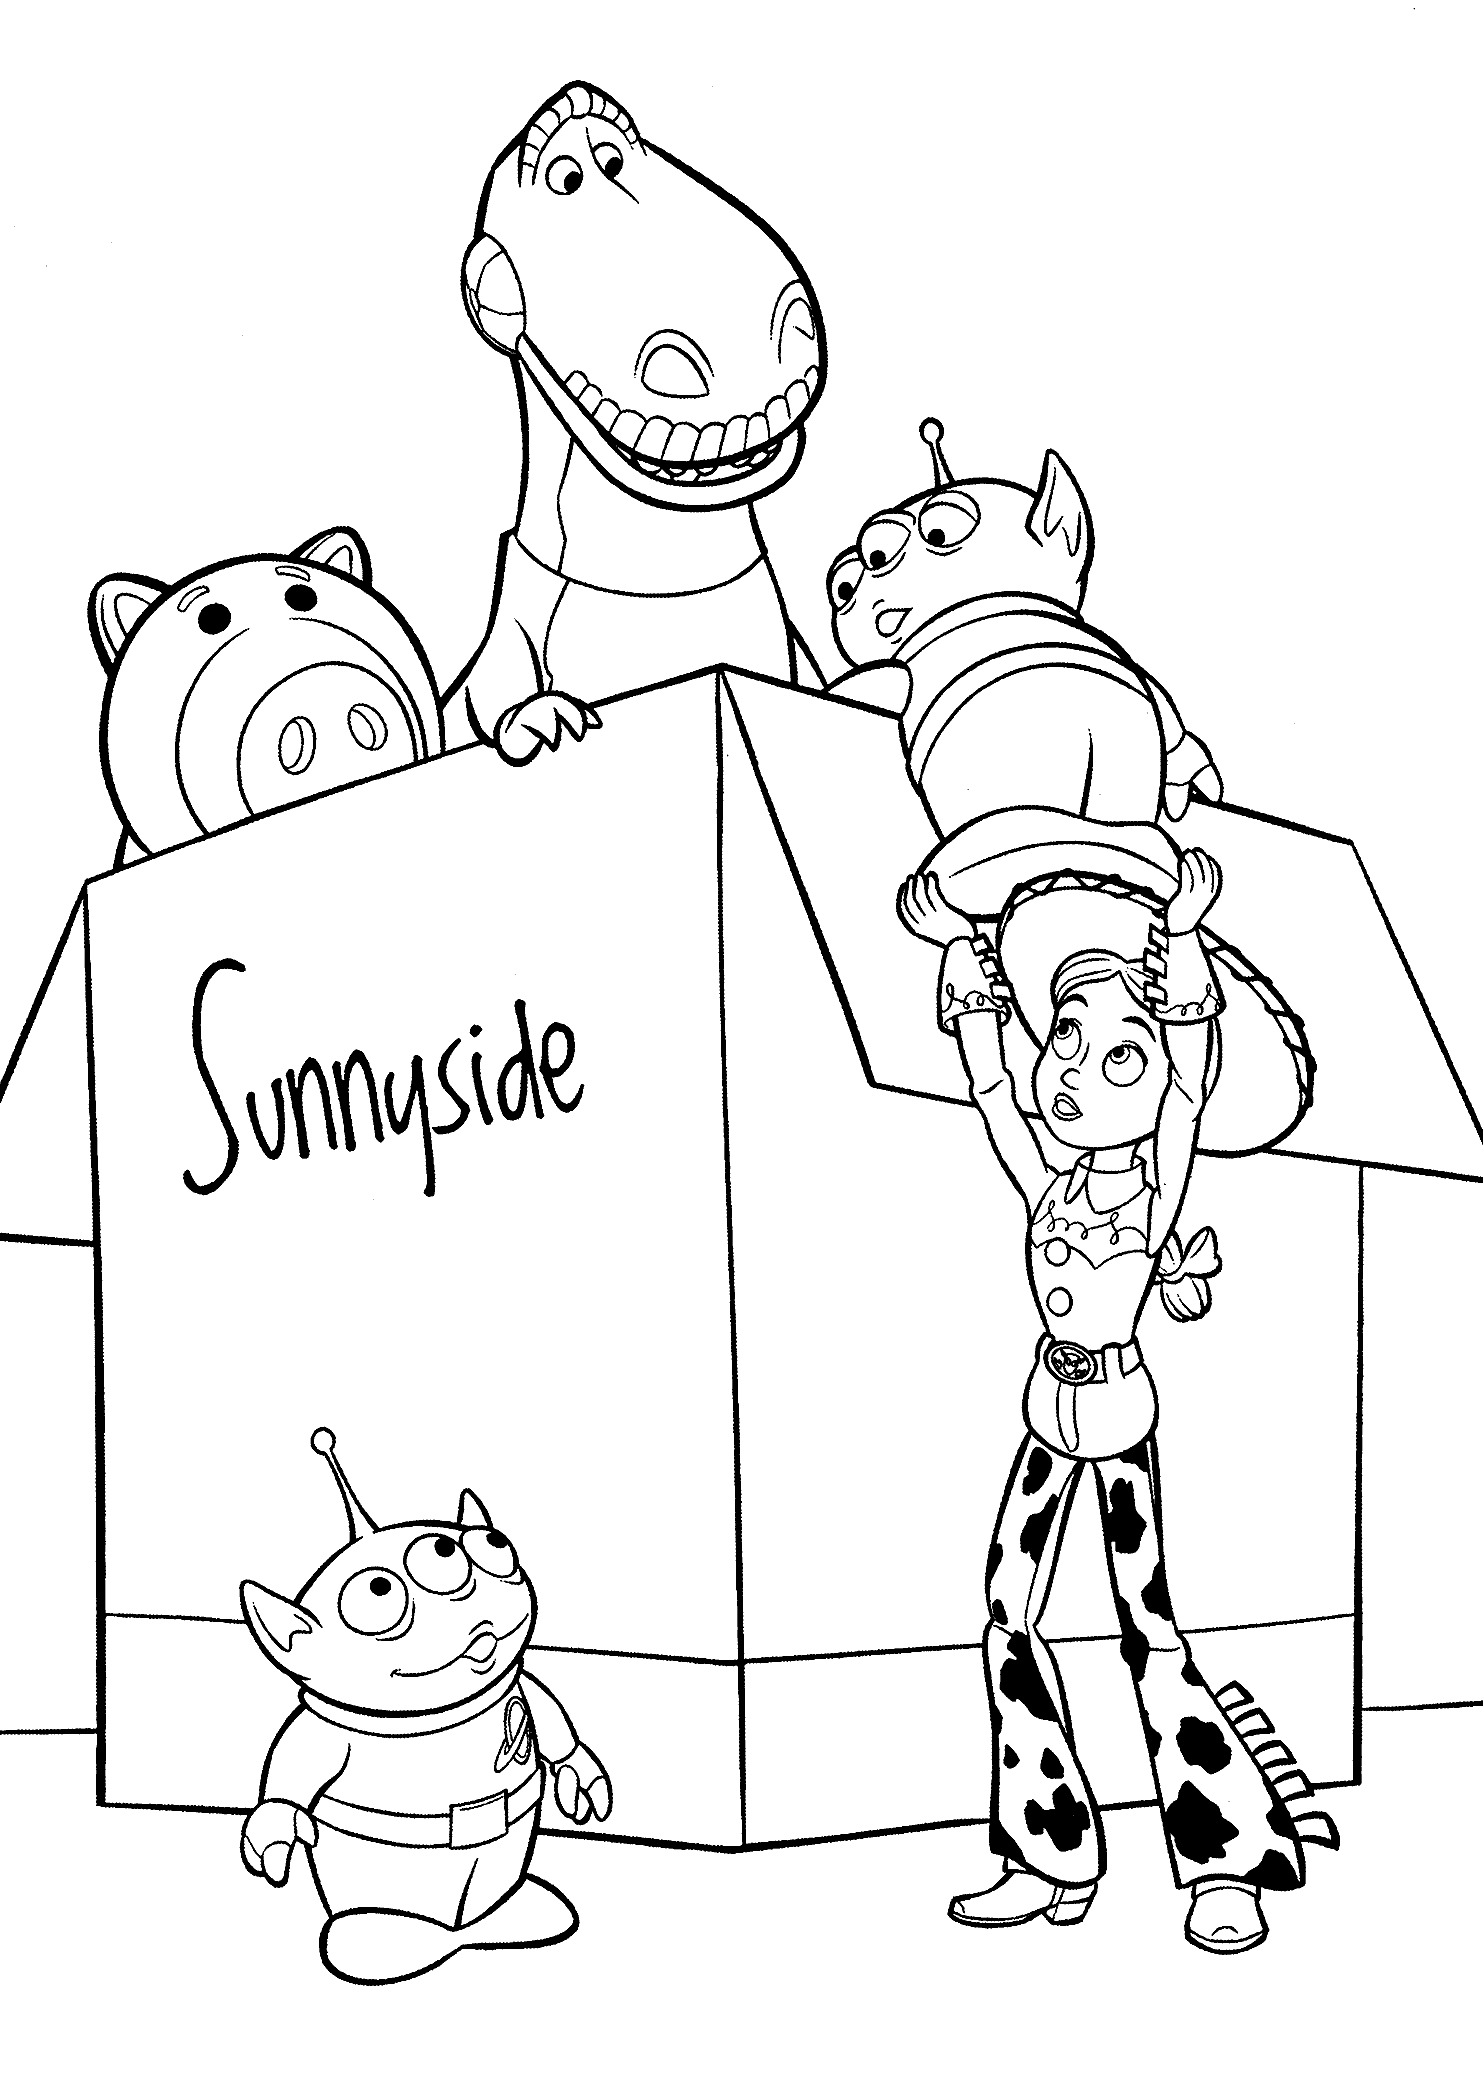 Toy Story Coloring Pages for Kids, Girls, Boys, Teens, Birthday